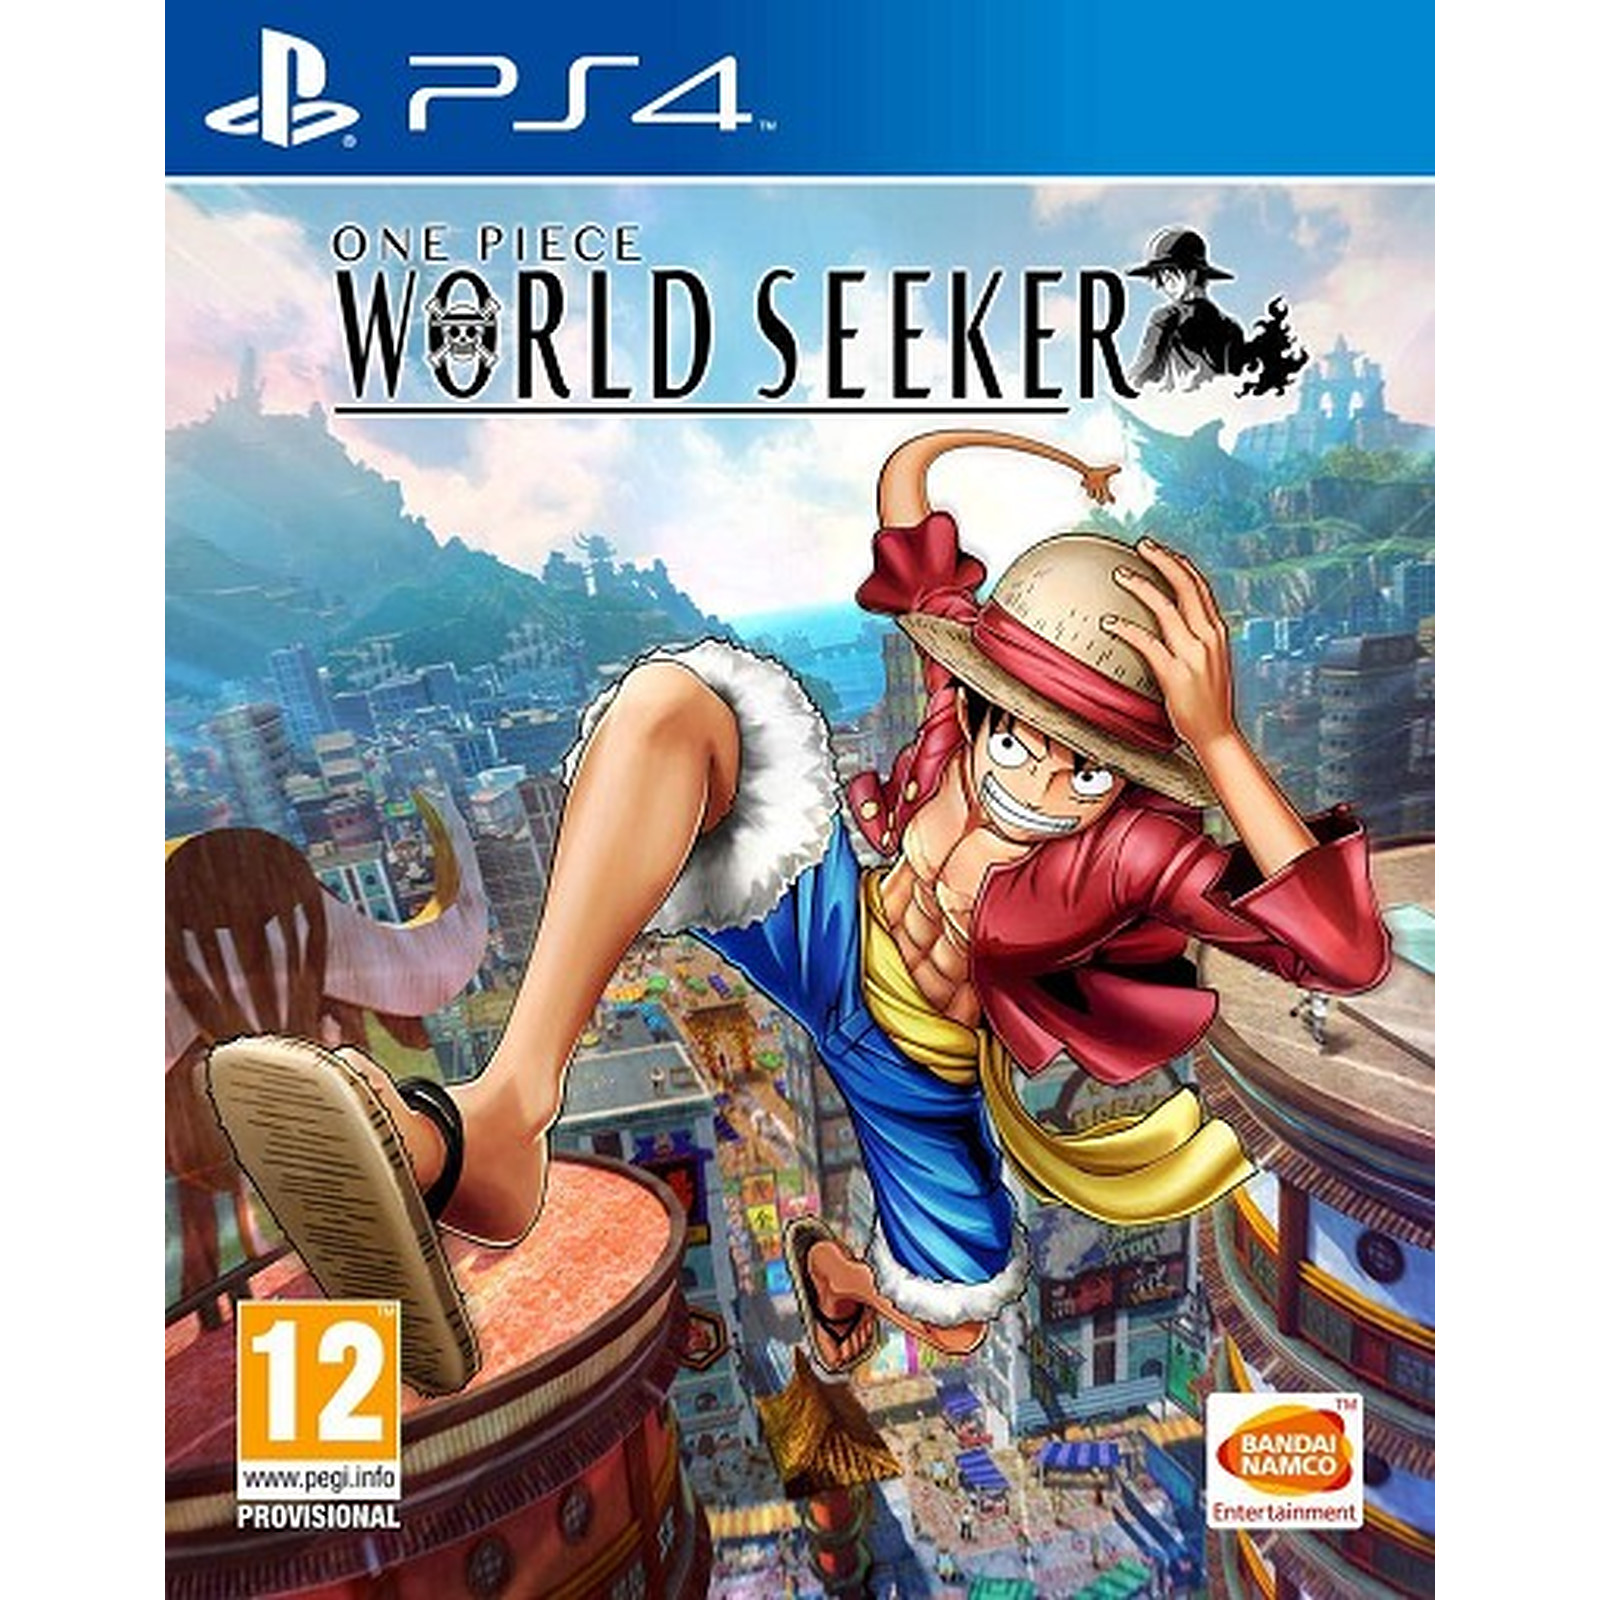 One Piece World Seeker (PS4) - Jeux PS4 Bandai Namco Games